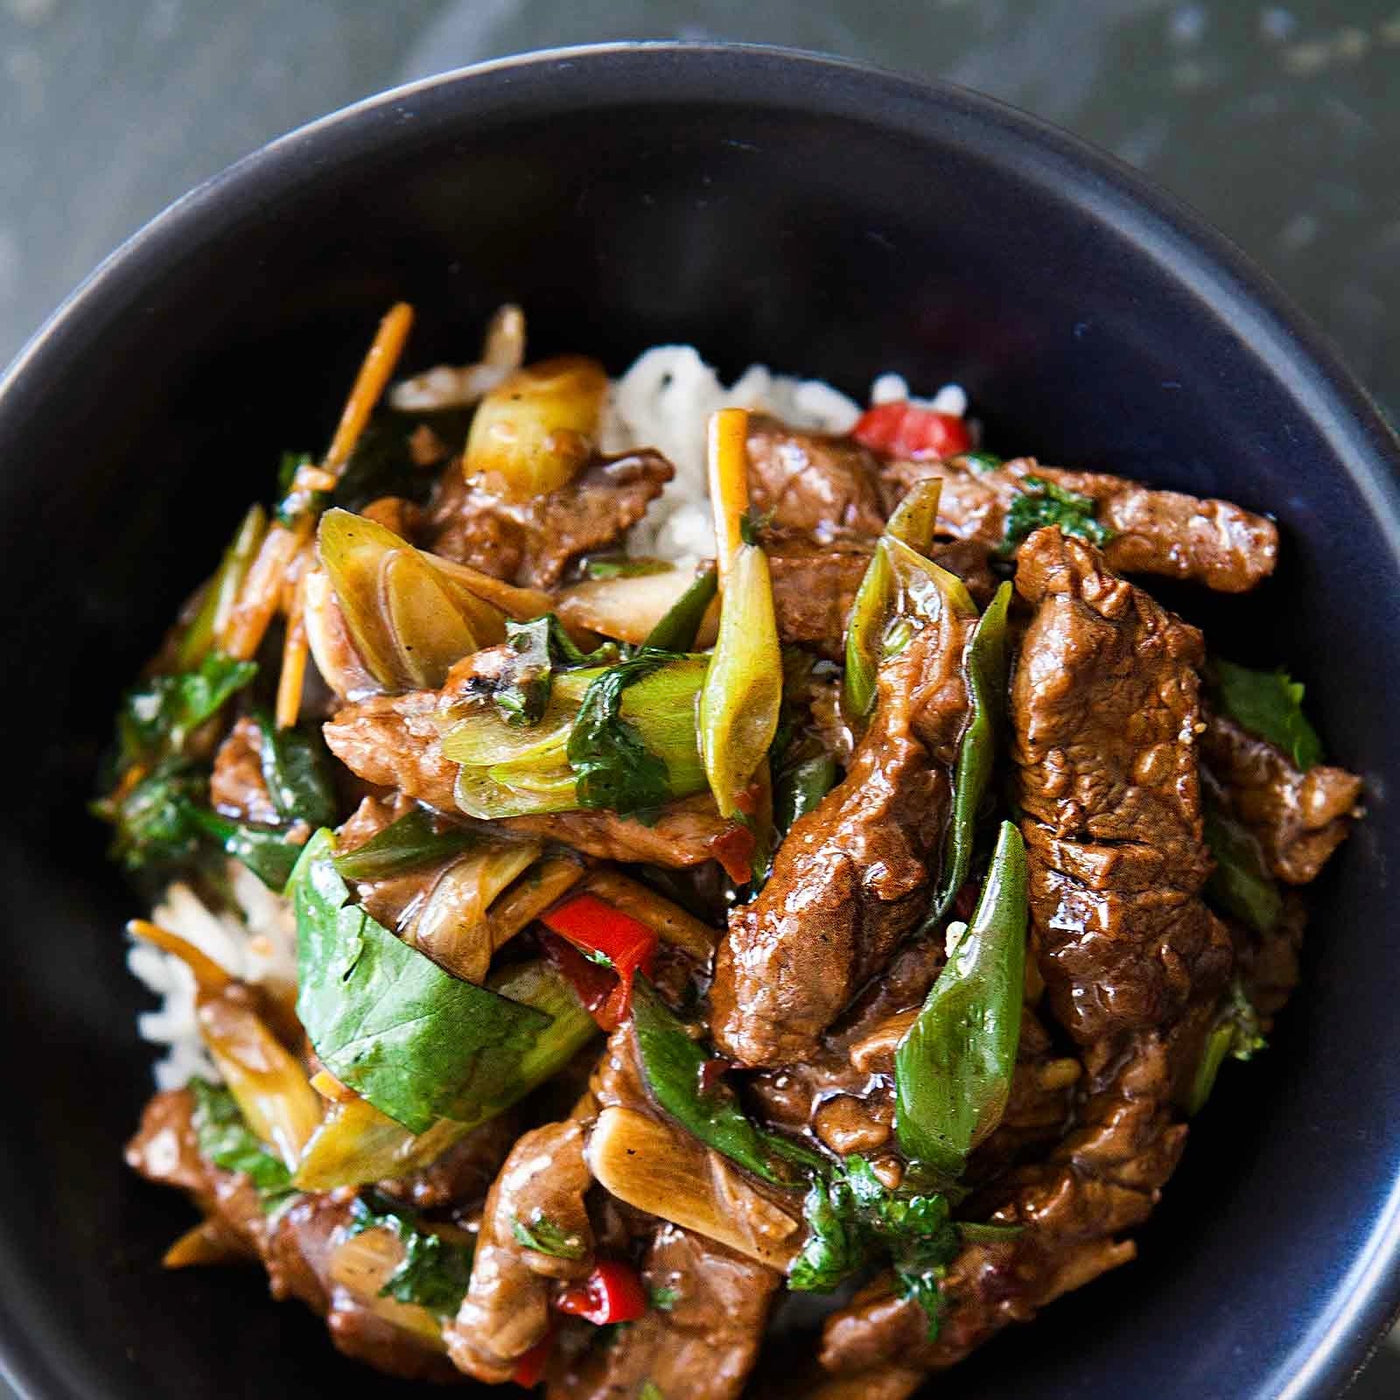 Shop Beef Stir Fry in Singapore - The New Grocer